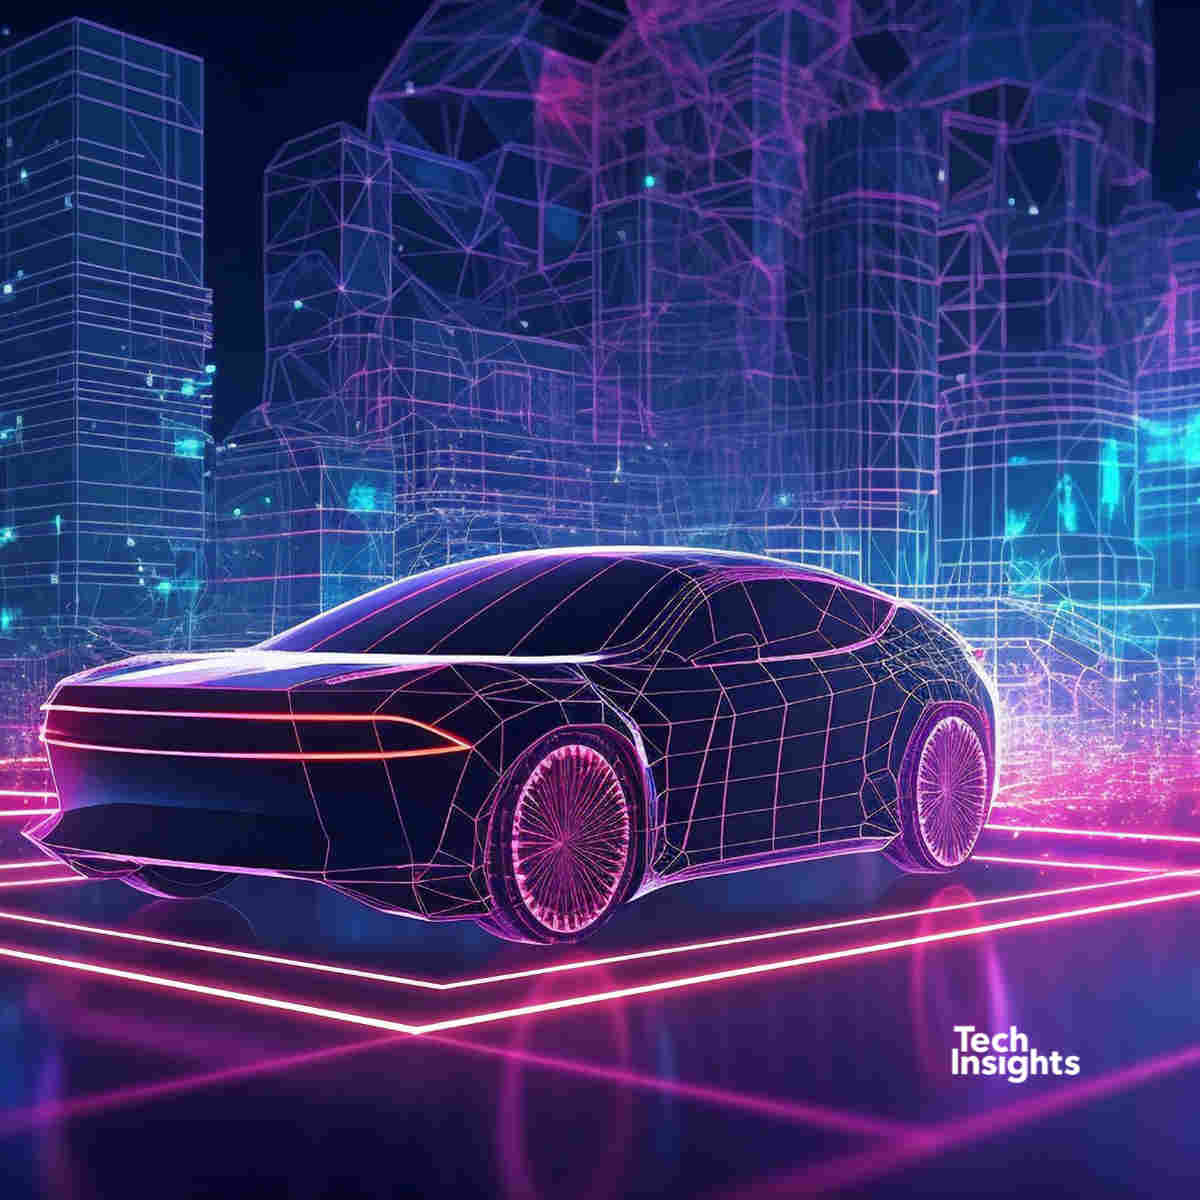 👉bit.ly/3OuzH4s Check out the TechInsights report: Automotive: Generative AI in the Infotainment Market and Beyond to get exclusive insight into the future of AI for automotive, potential industry-specific use cases for it, and more.